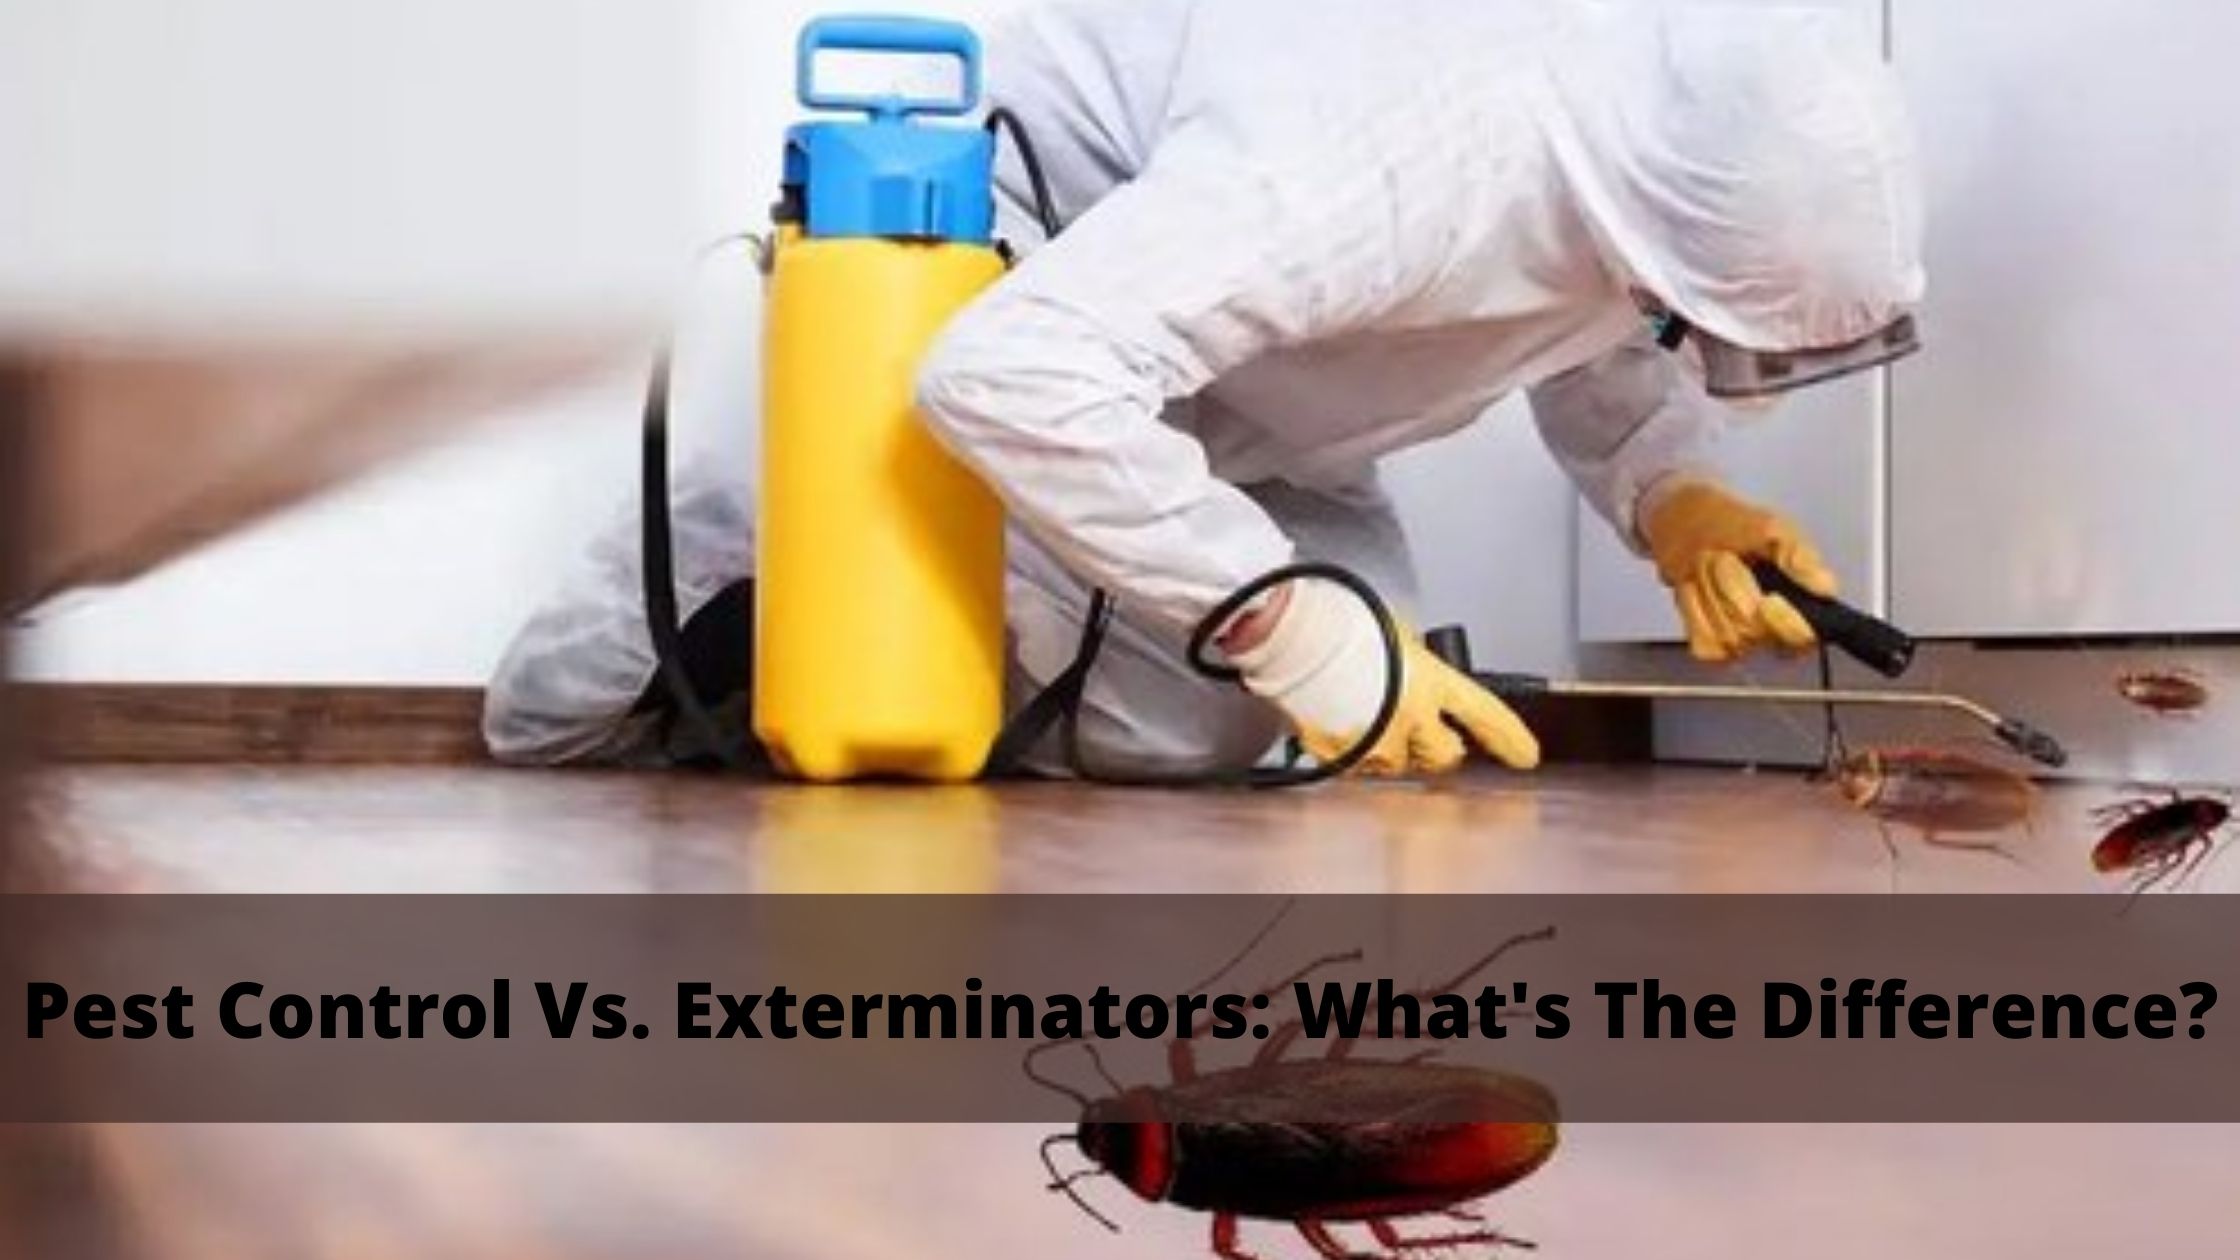 Pest Control Vs. Exterminators: What's The Difference?